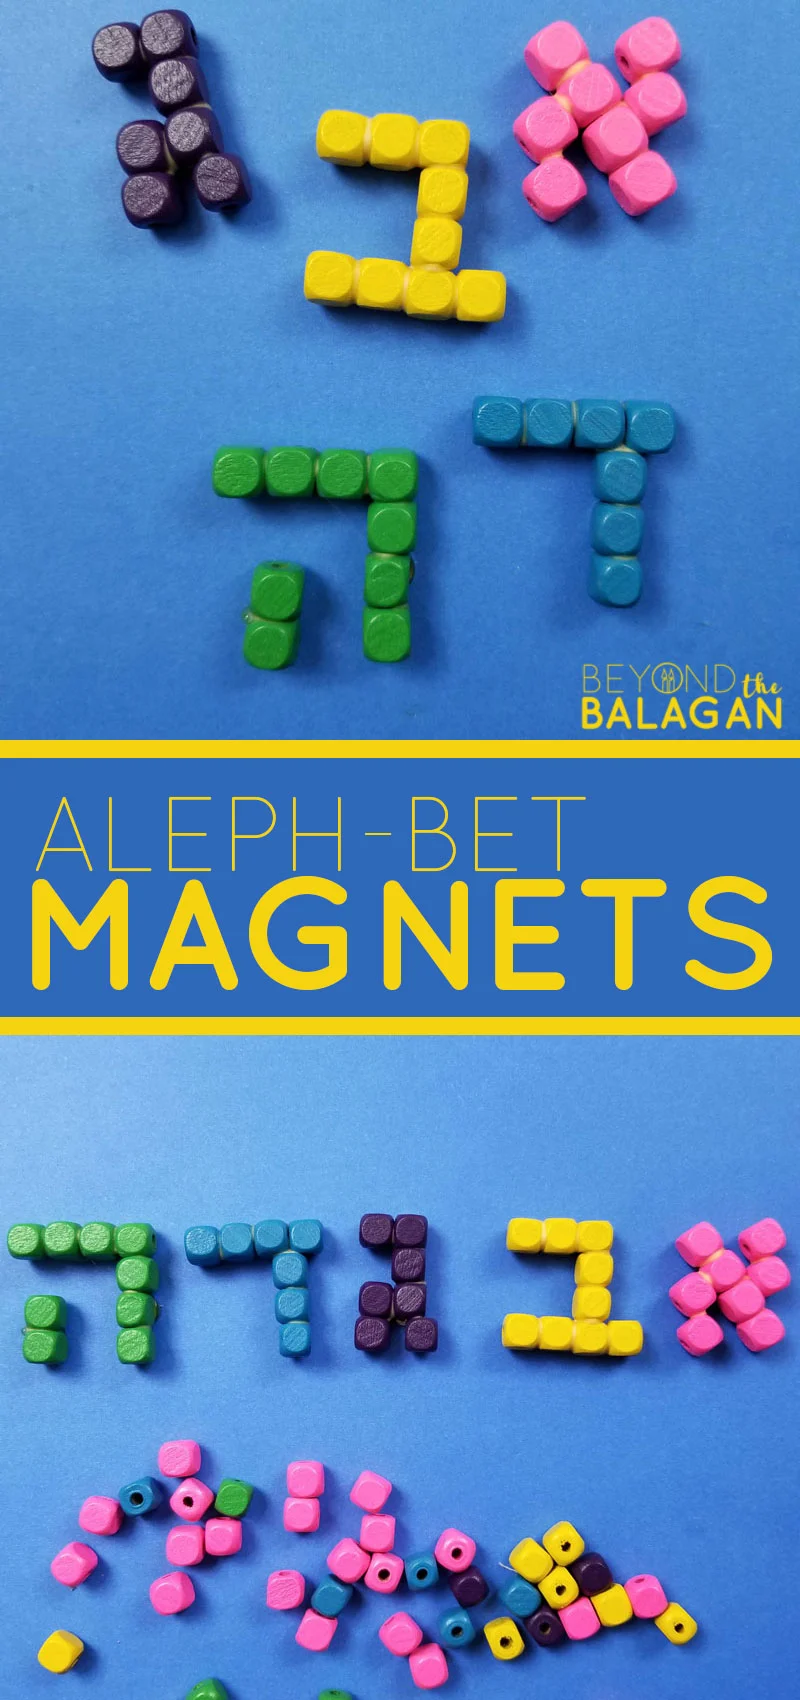 Click to learn how to make your own aleph bet magnets featuring the Hebrew alphabet! You'll love this easy Jewish kids' craft! #hebrew #alephbet #jewish